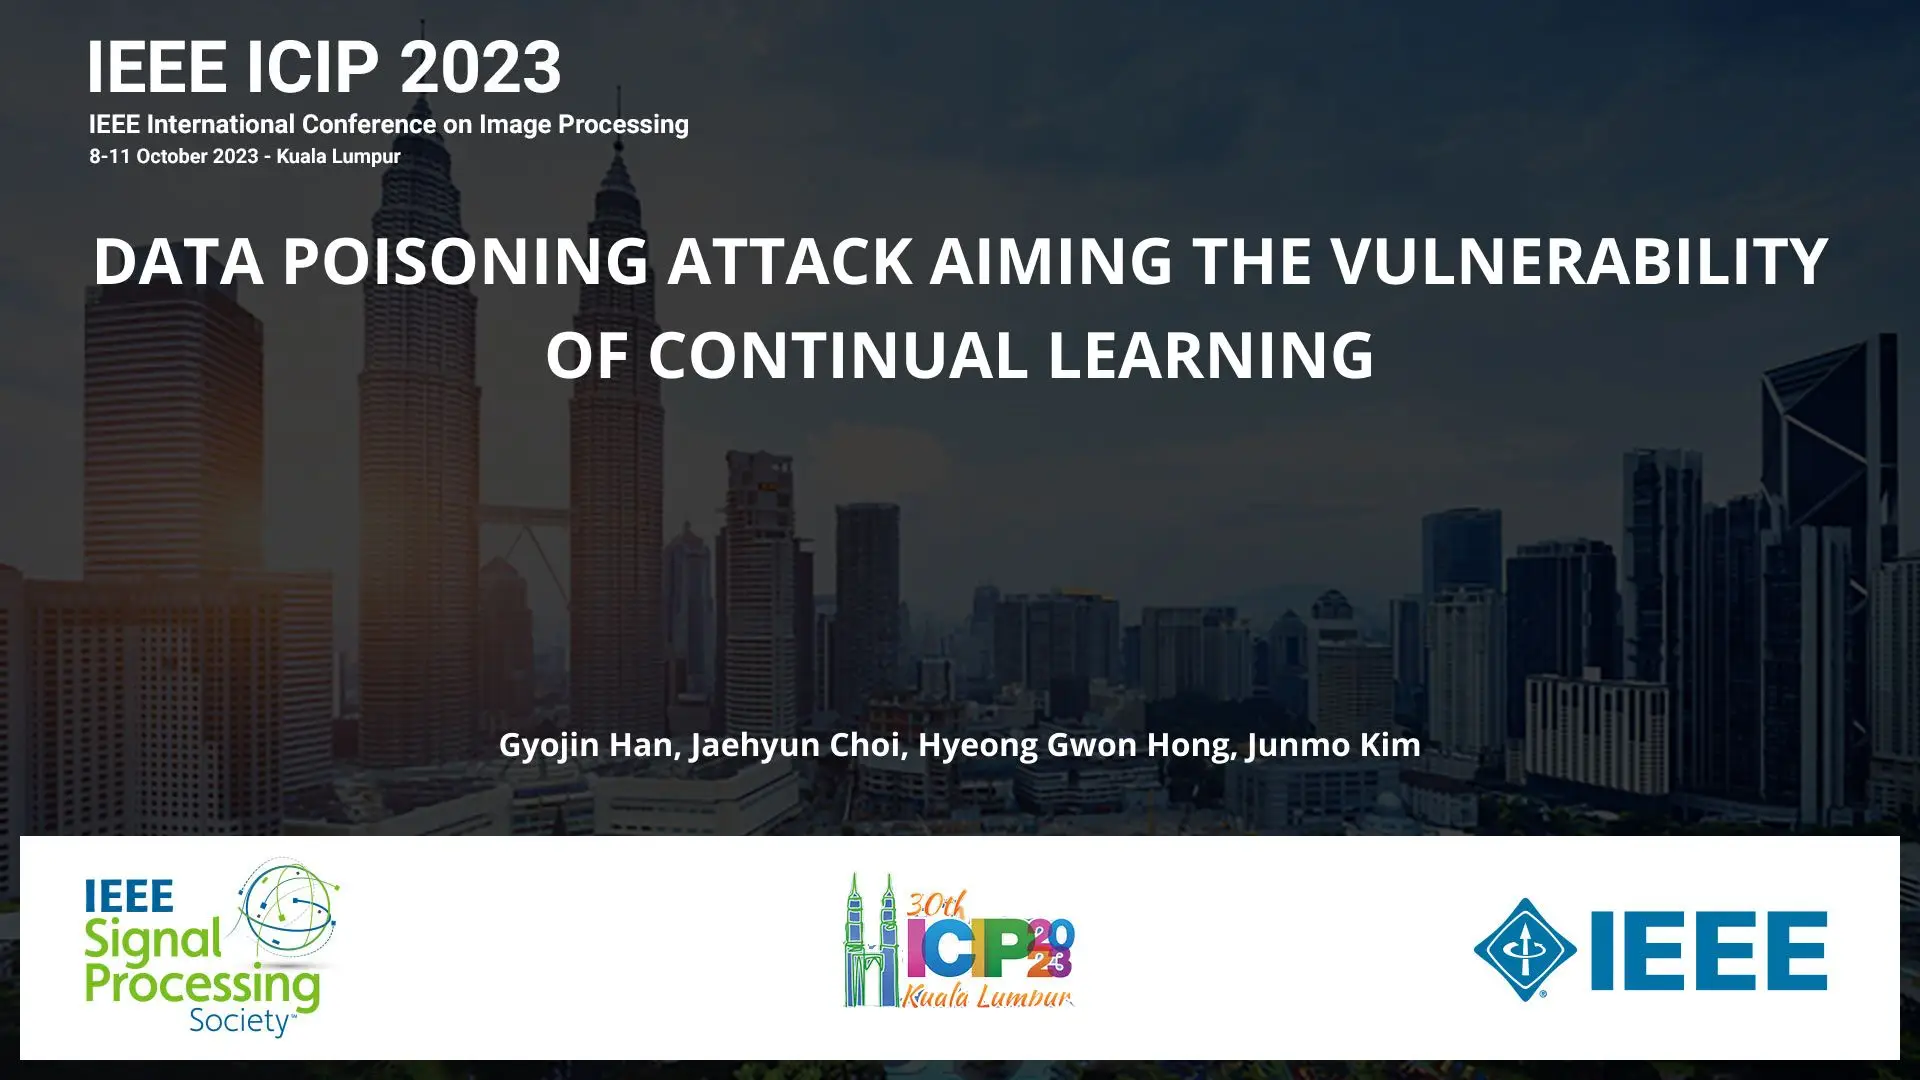 DATA POISONING ATTACK AIMING THE VULNERABILITY OF CONTINUAL LEARNING